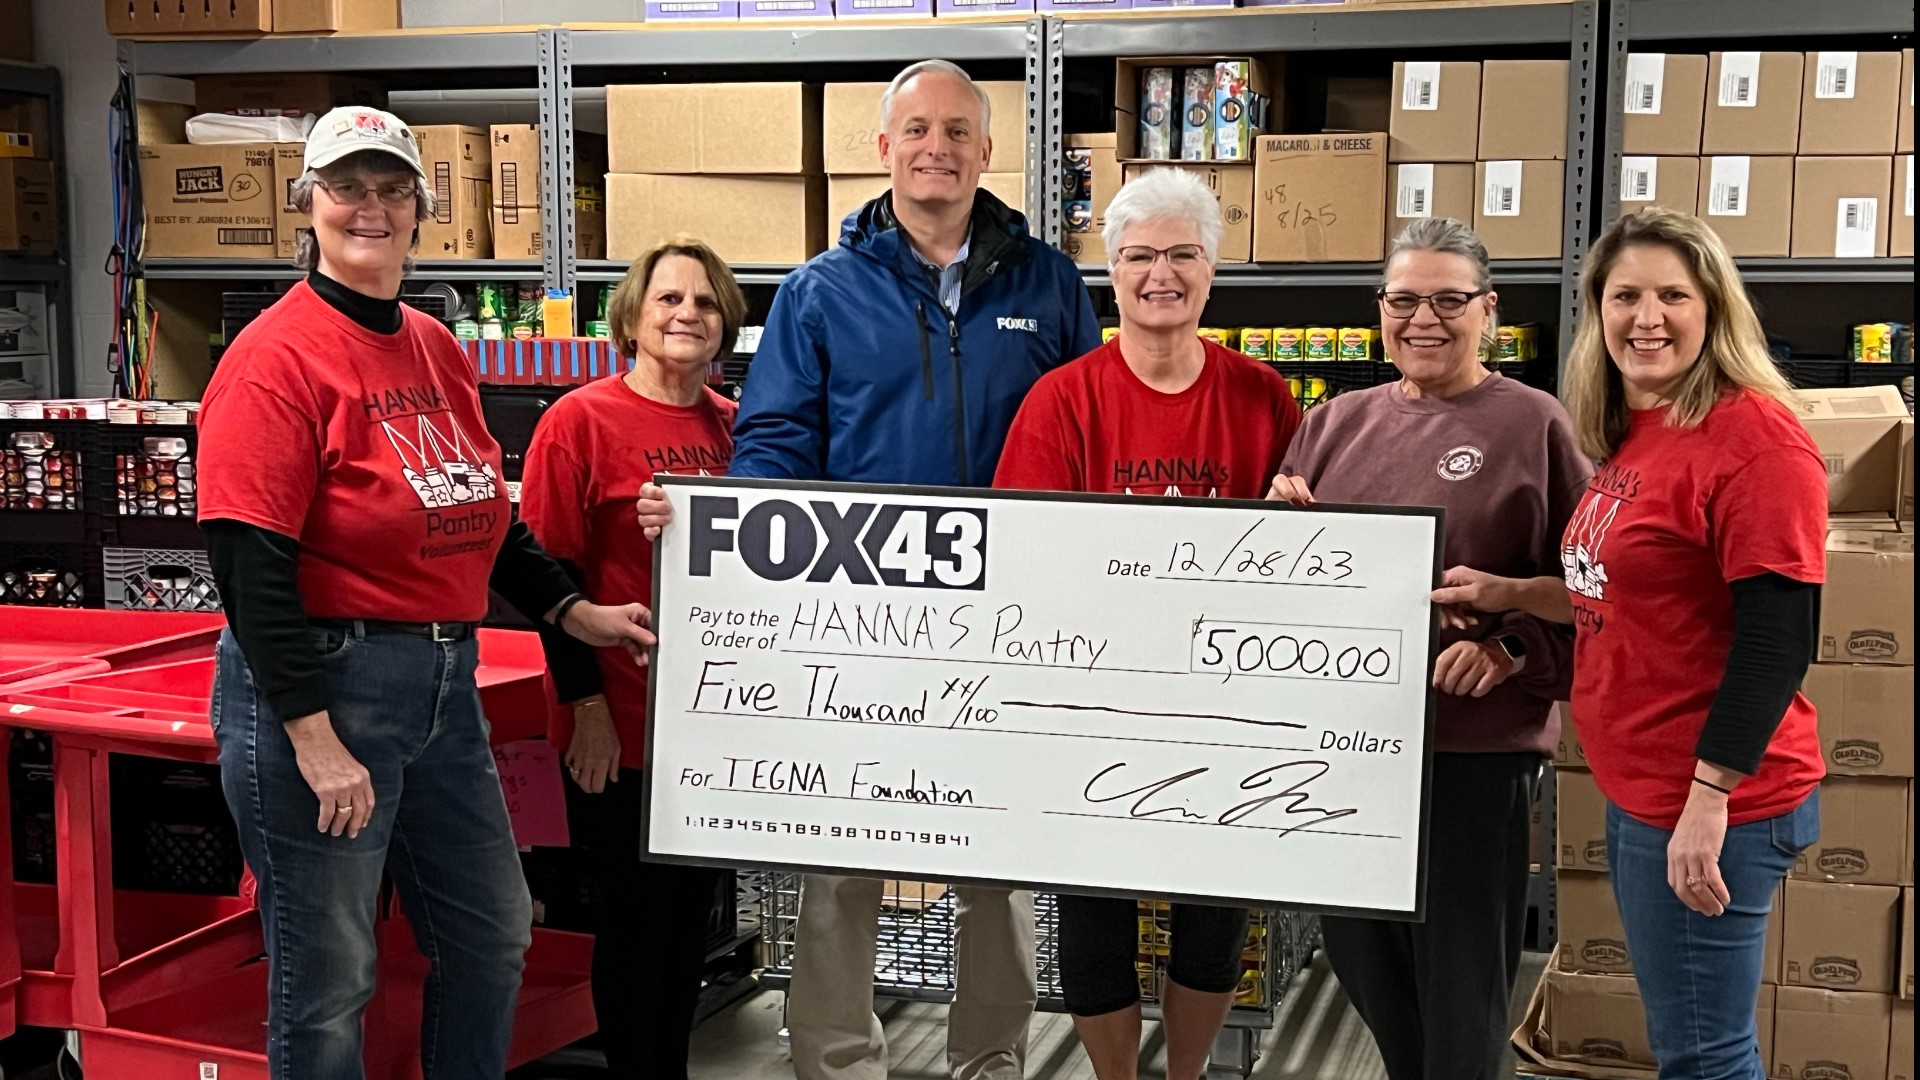 Chris Topf, FOX43's president and general manager, presented Hanna's Pantry with a $5,000 check courtesy of the TEGNA Foundation.